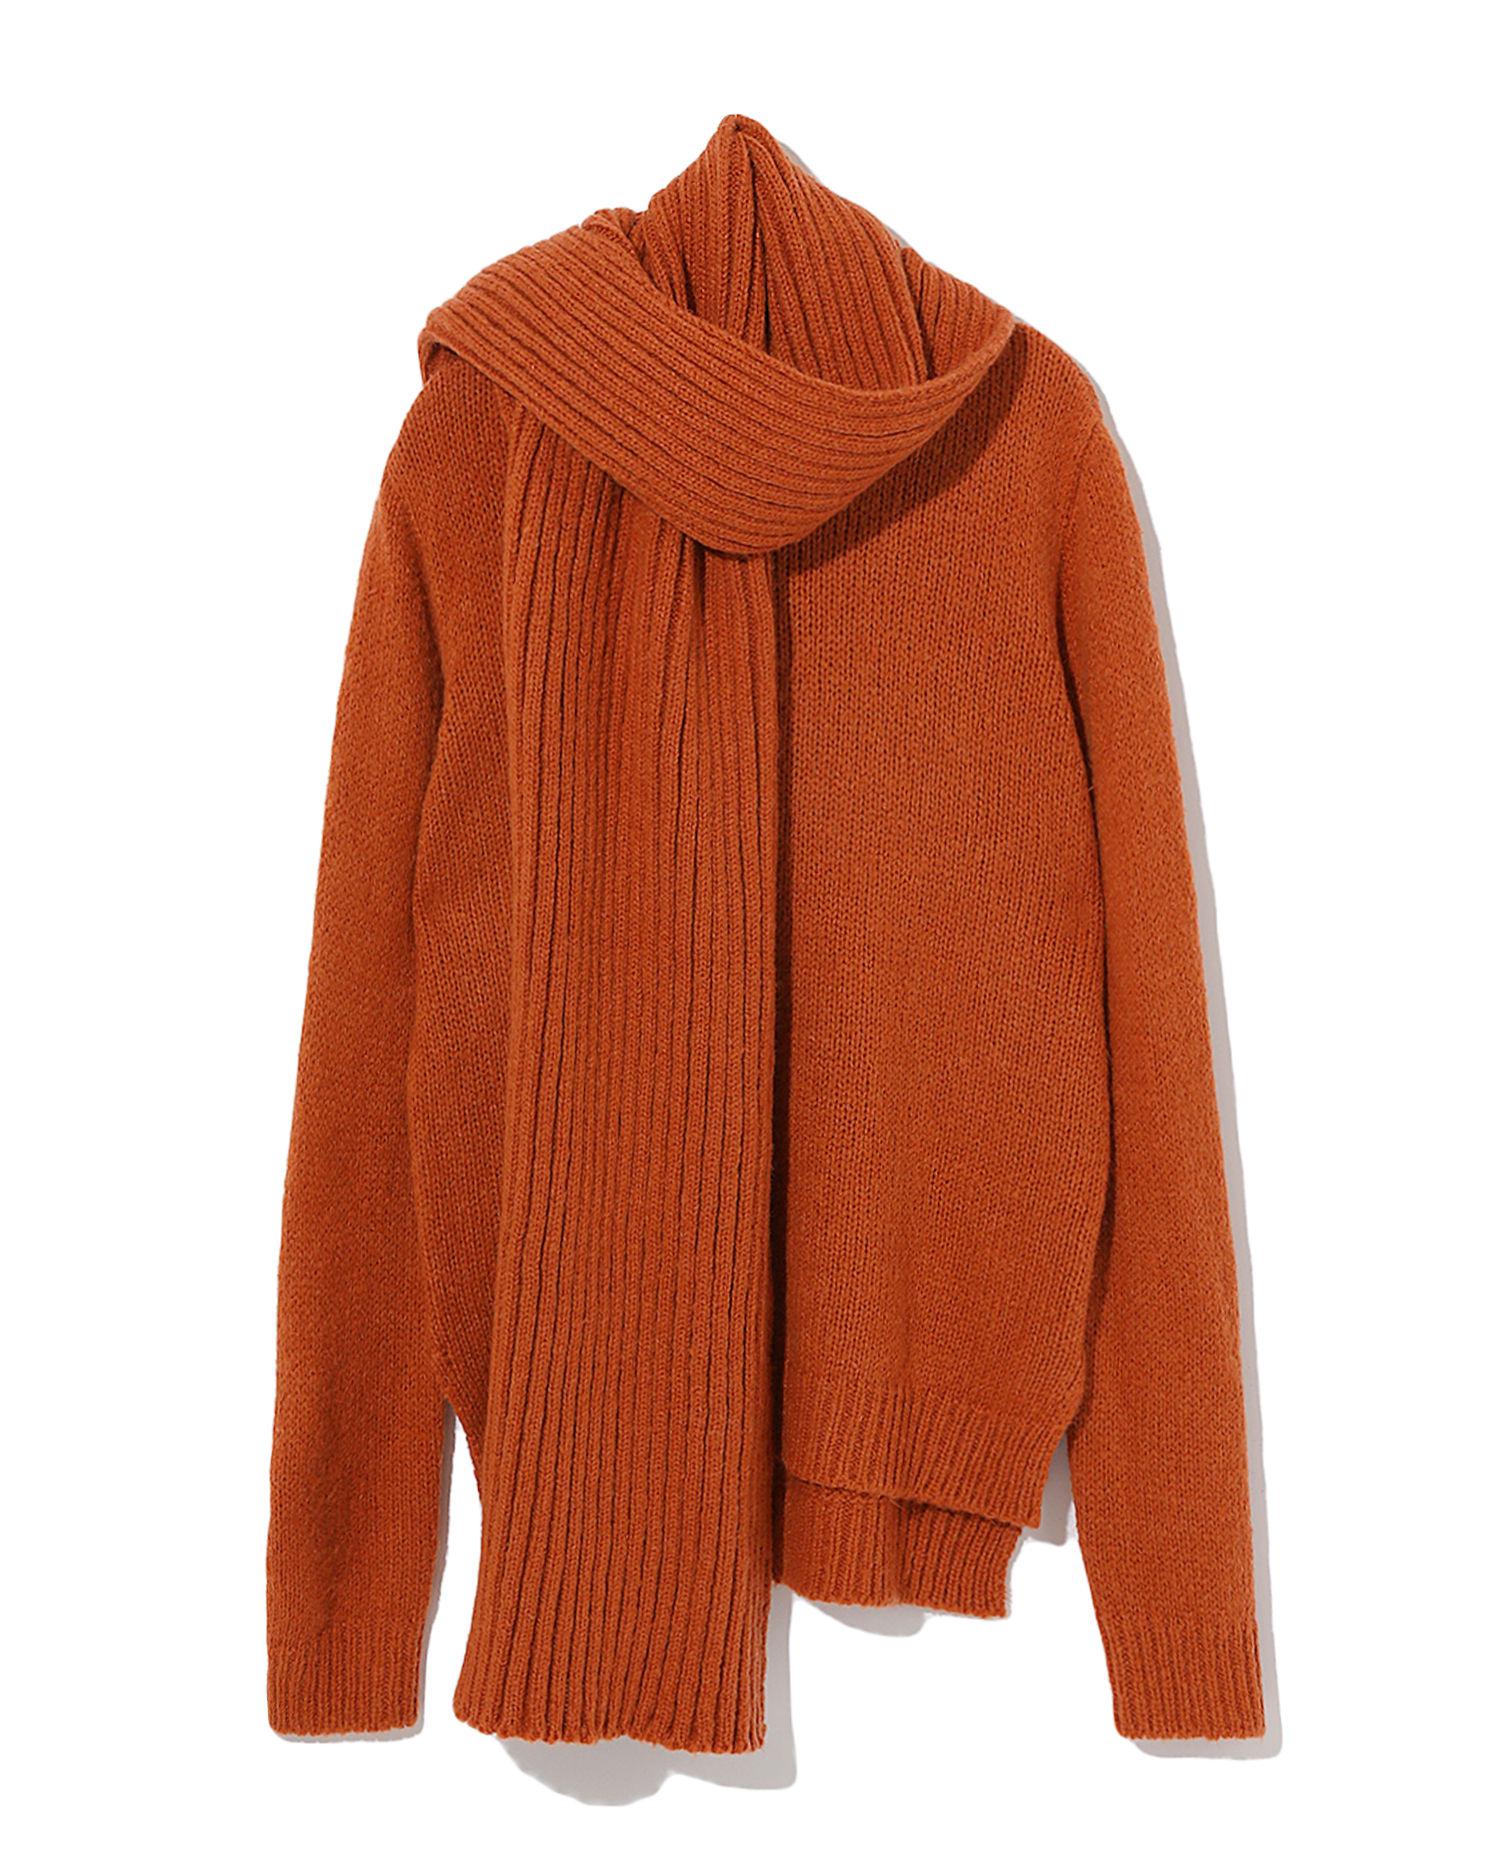 Scarf collar knit sweater by AMONG